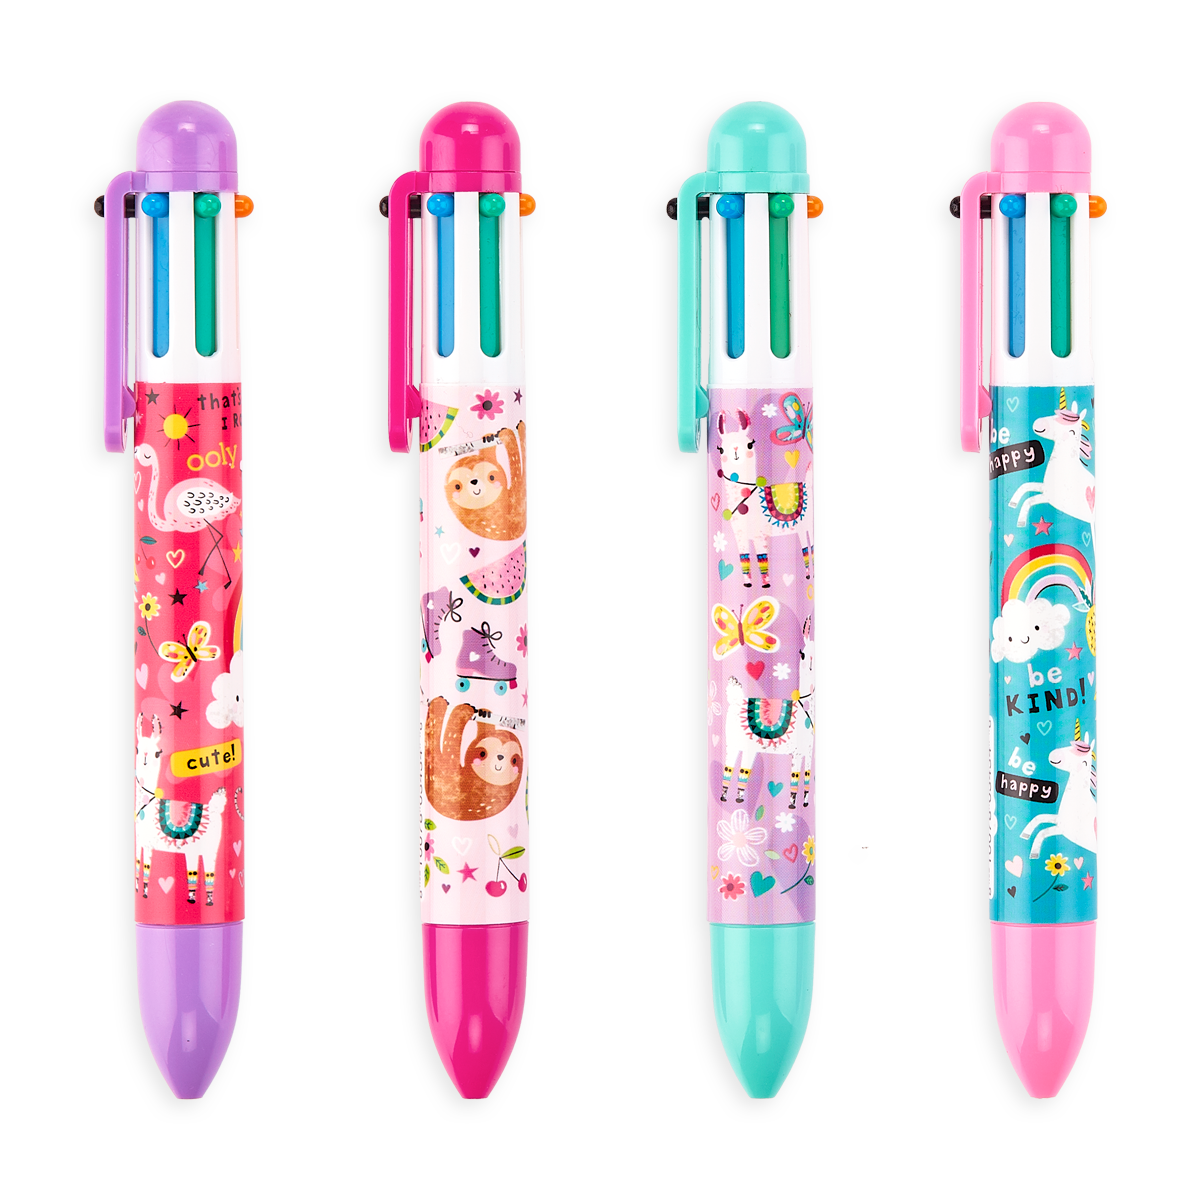 Ooly - Funtastic Friends Scented Colored Mini Gel Pens